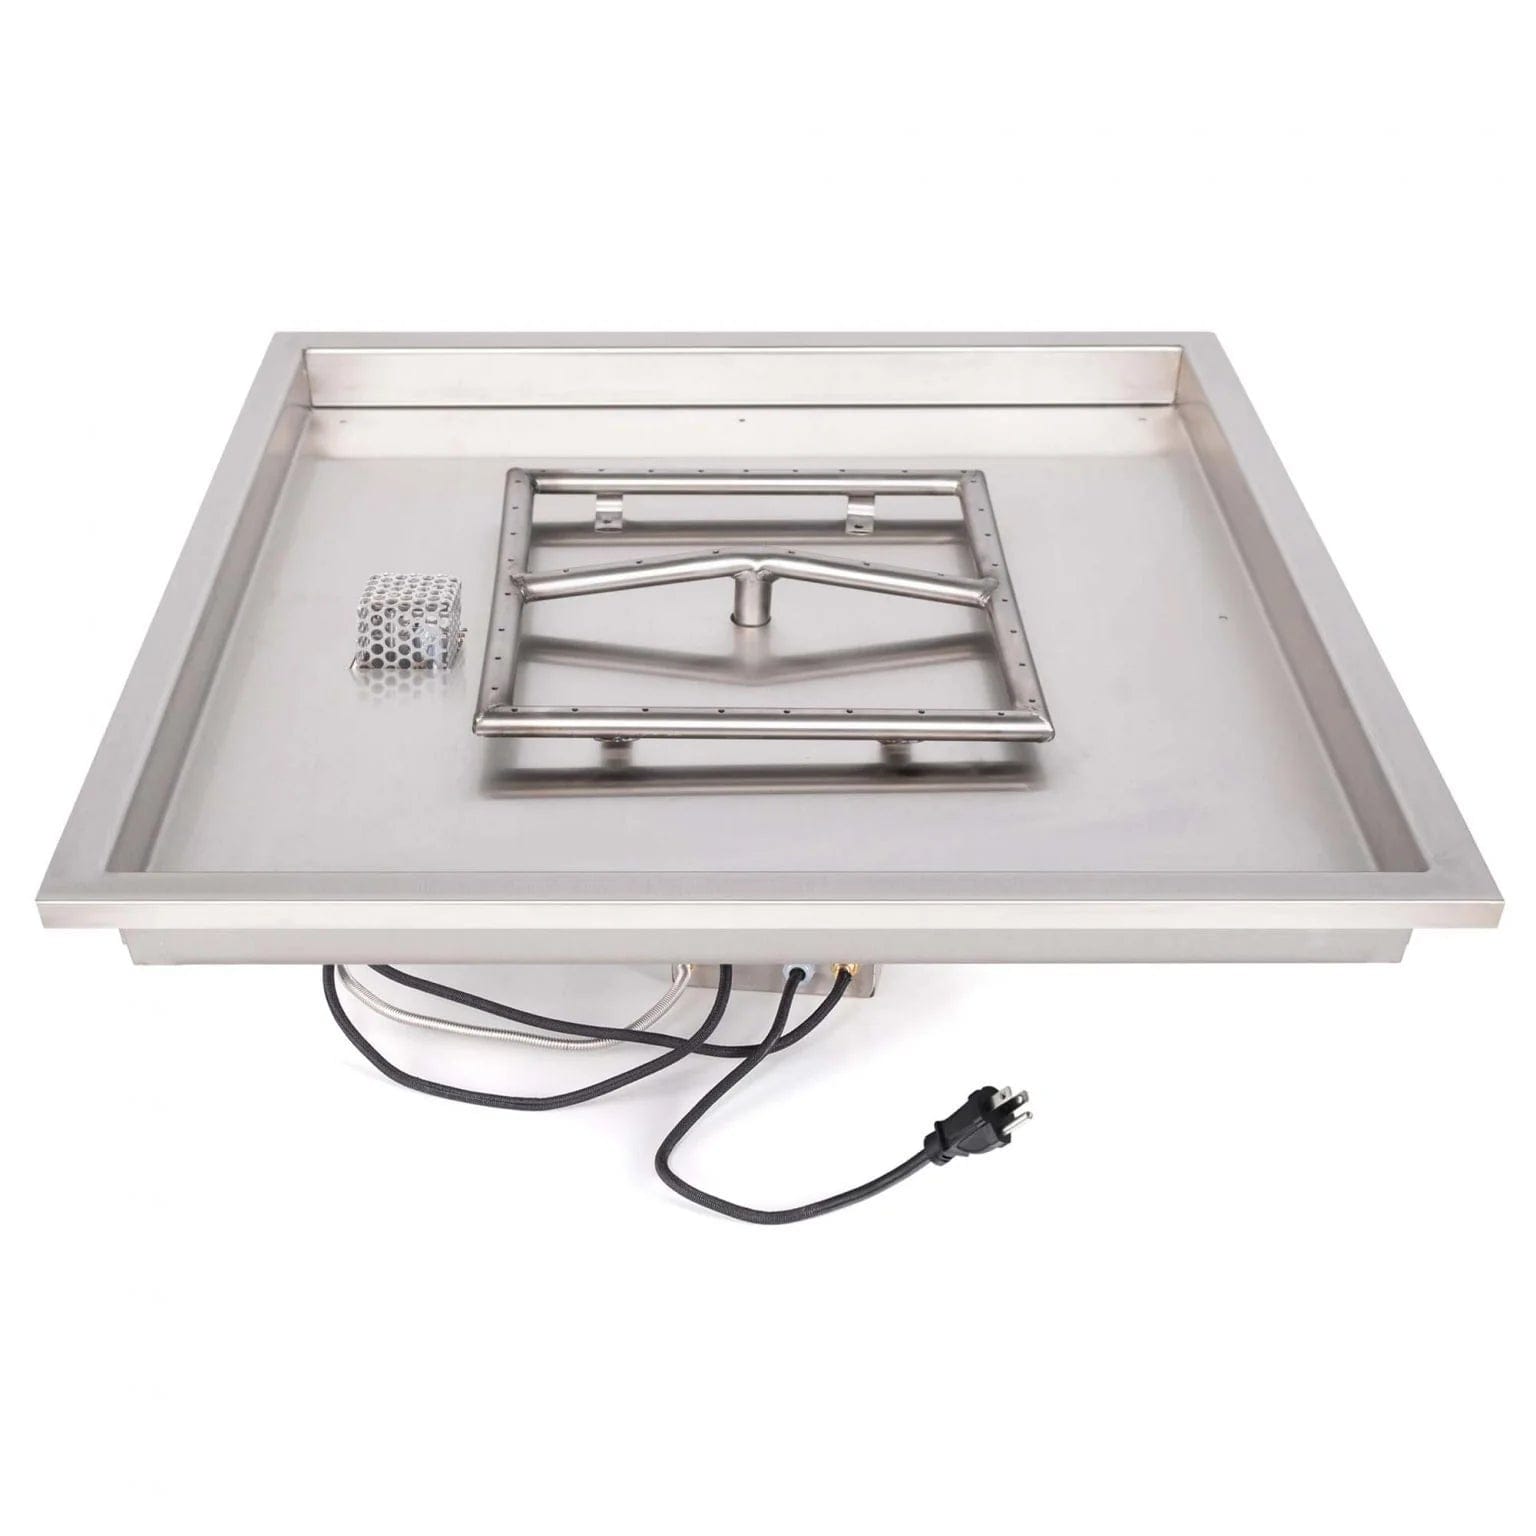 The Outdoor Plus Square Raised Lip Drop-in Pan with Square Stainless Steel Burner with Ignition System in White Background